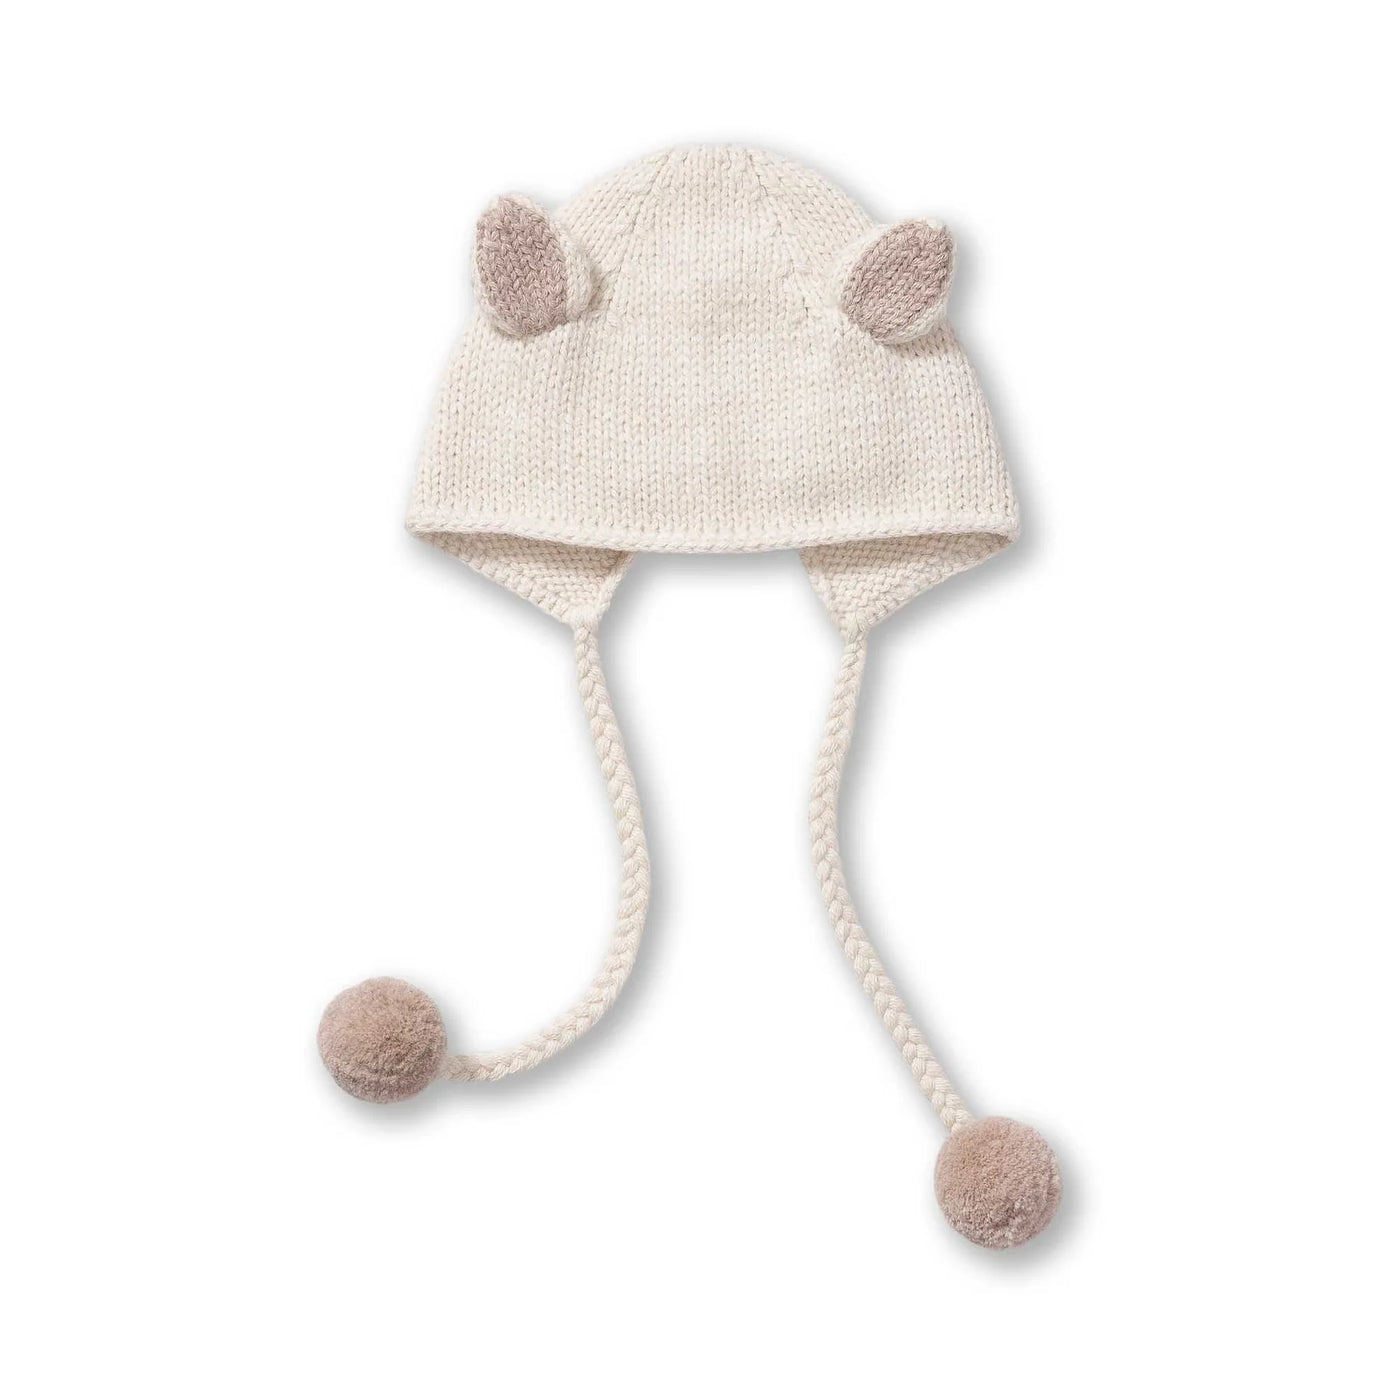 ALICIA ADAMS BUNNY HAT BABY (Available in Sizes and Colors)